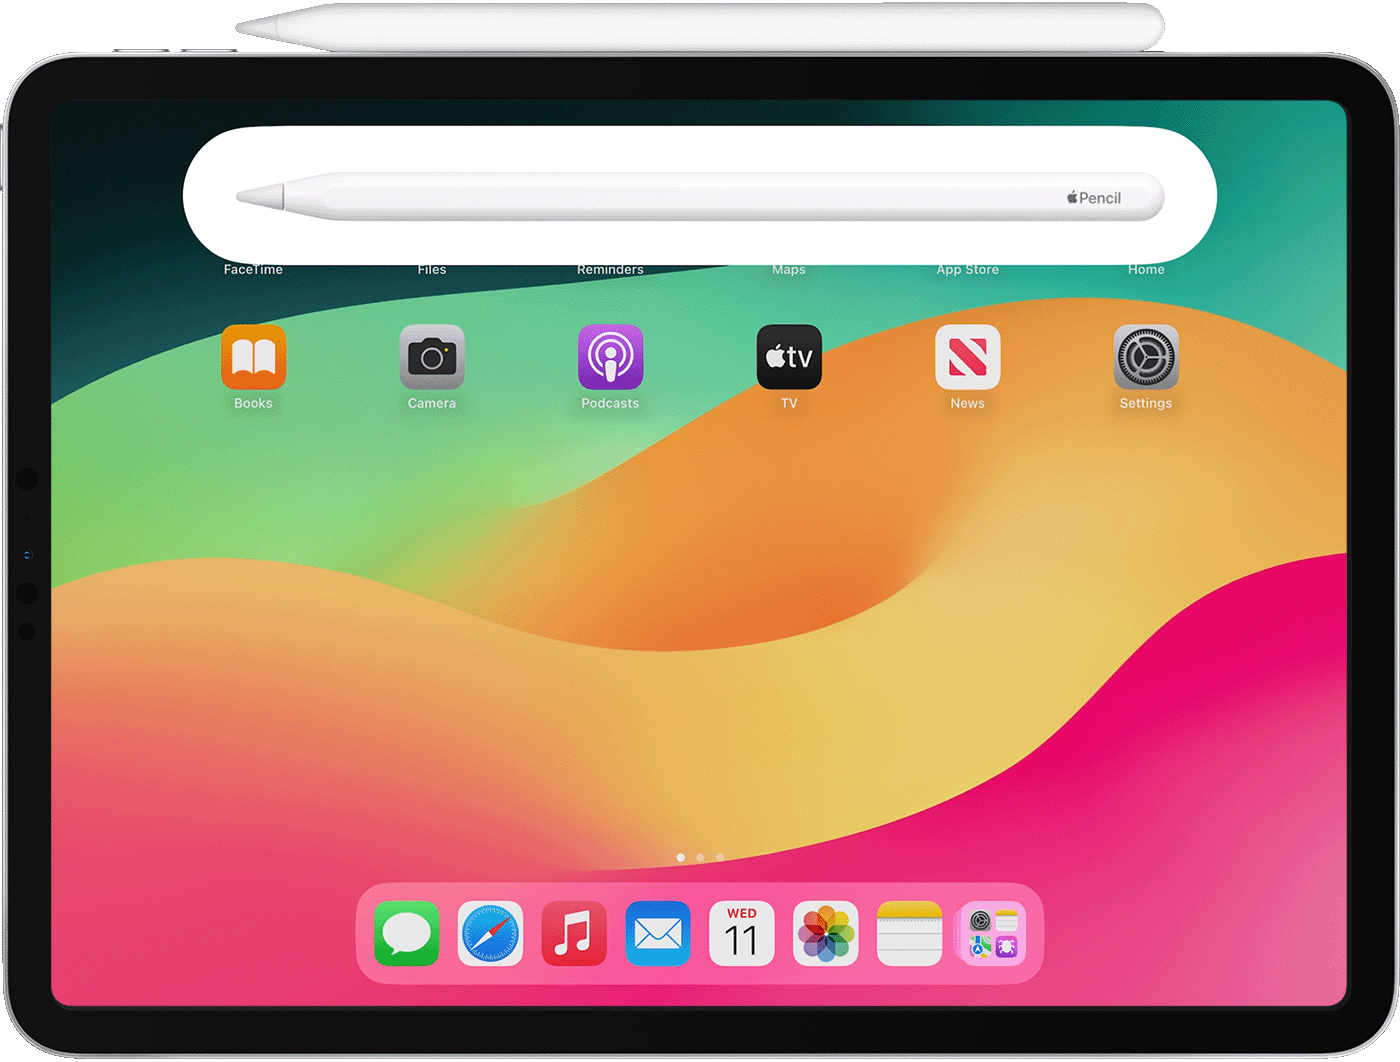 Pair Apple Pencil with your iPad - Apple Support